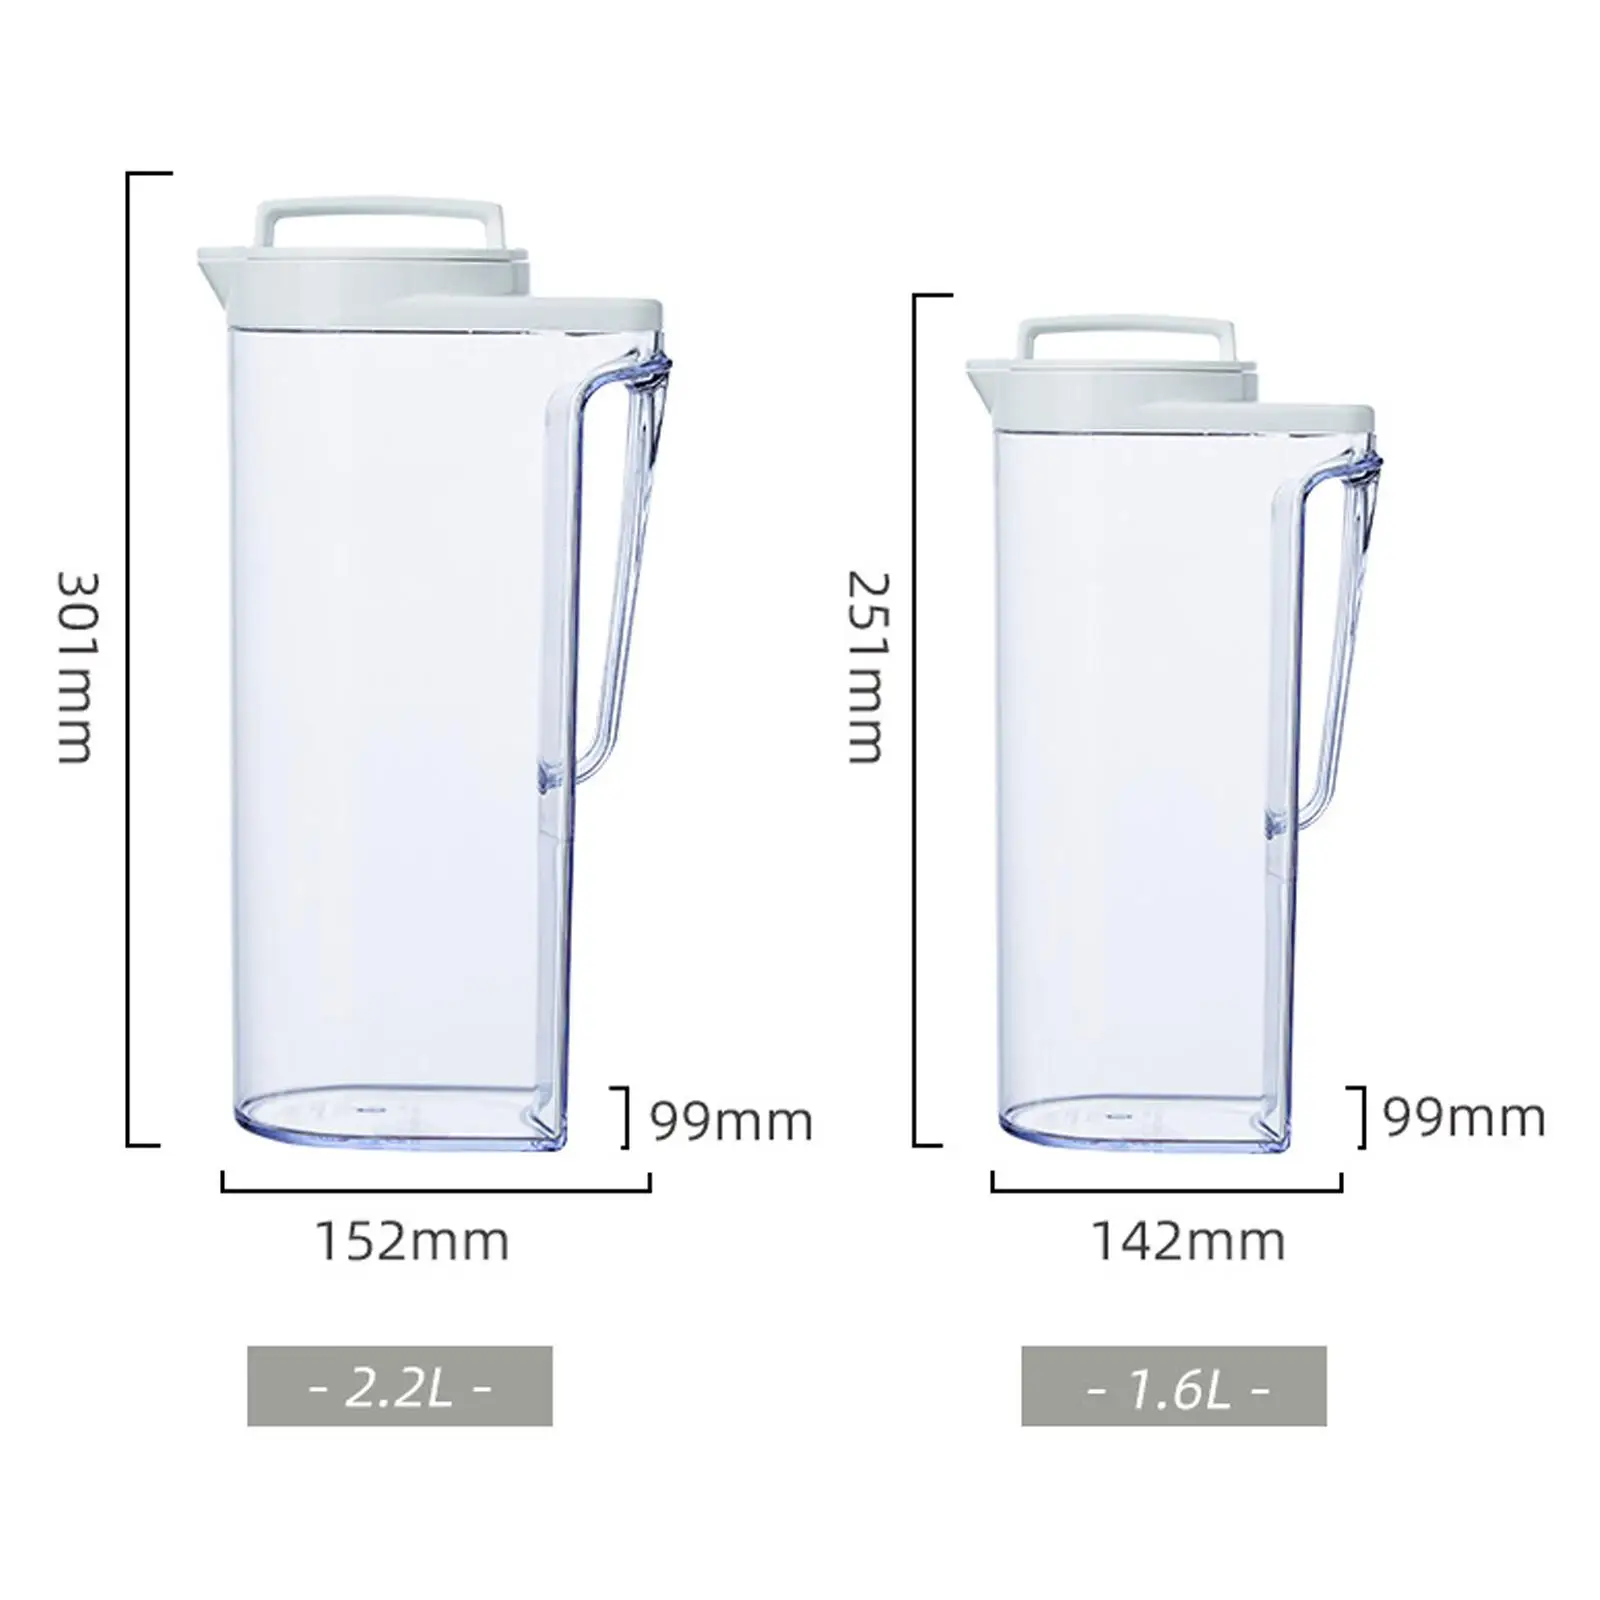 Water Pitcher with Double Handles, Household Teapot, Juice Beverage Dispenser with Lid and Spout, Iced Tea Pitcher Jug